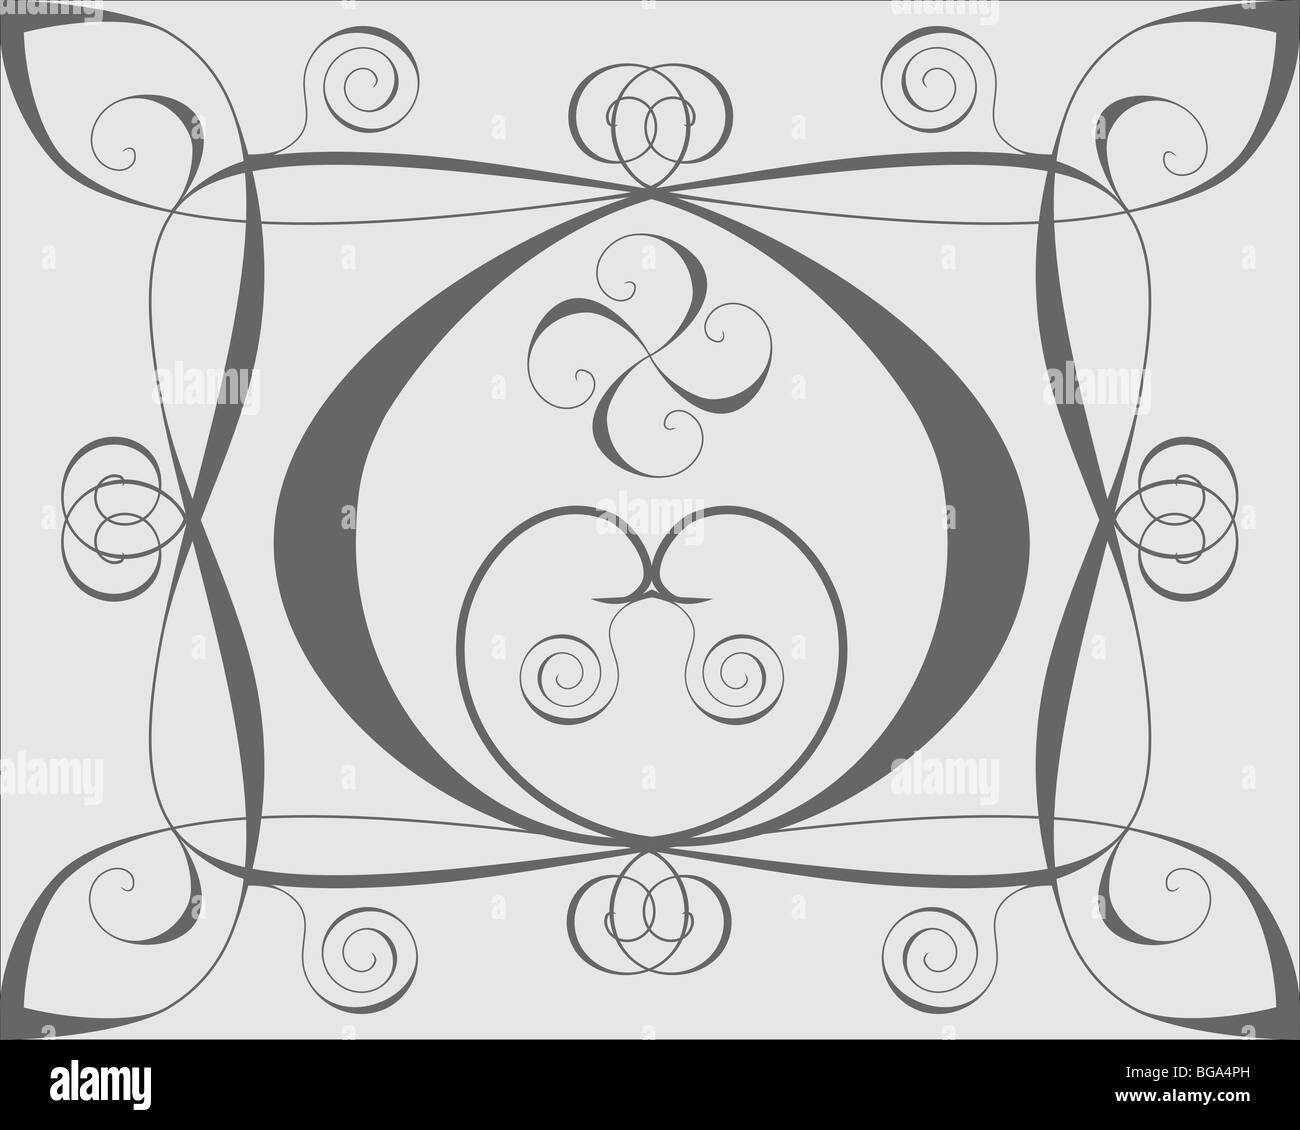 Design background with hearts and spirals on gray Stock Photo